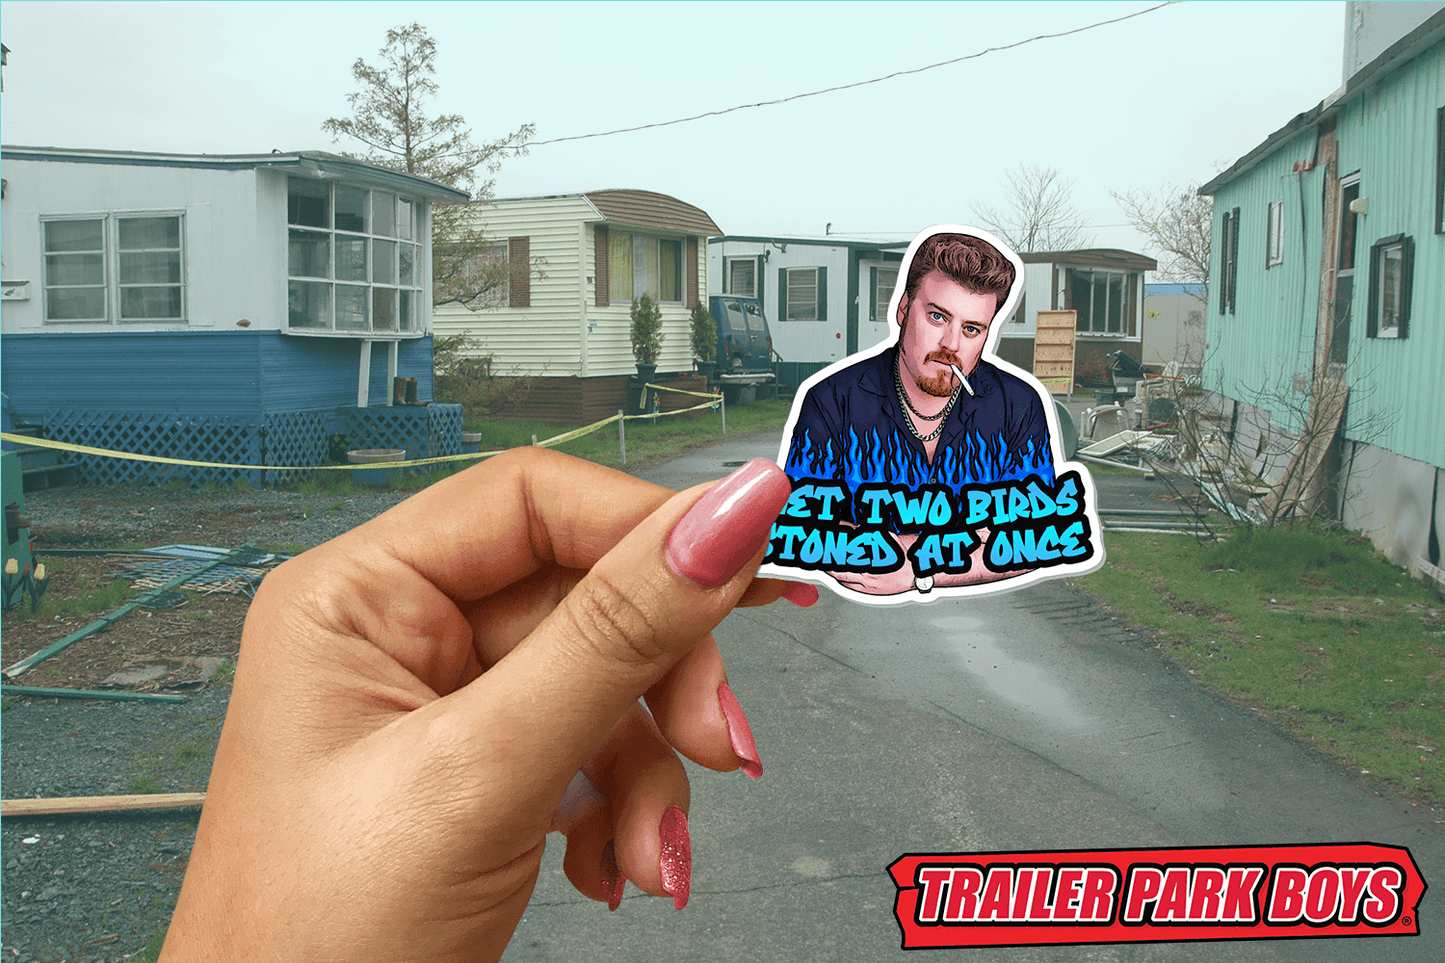 Trailer Park Boys - Get Two Birds Stoned At Once